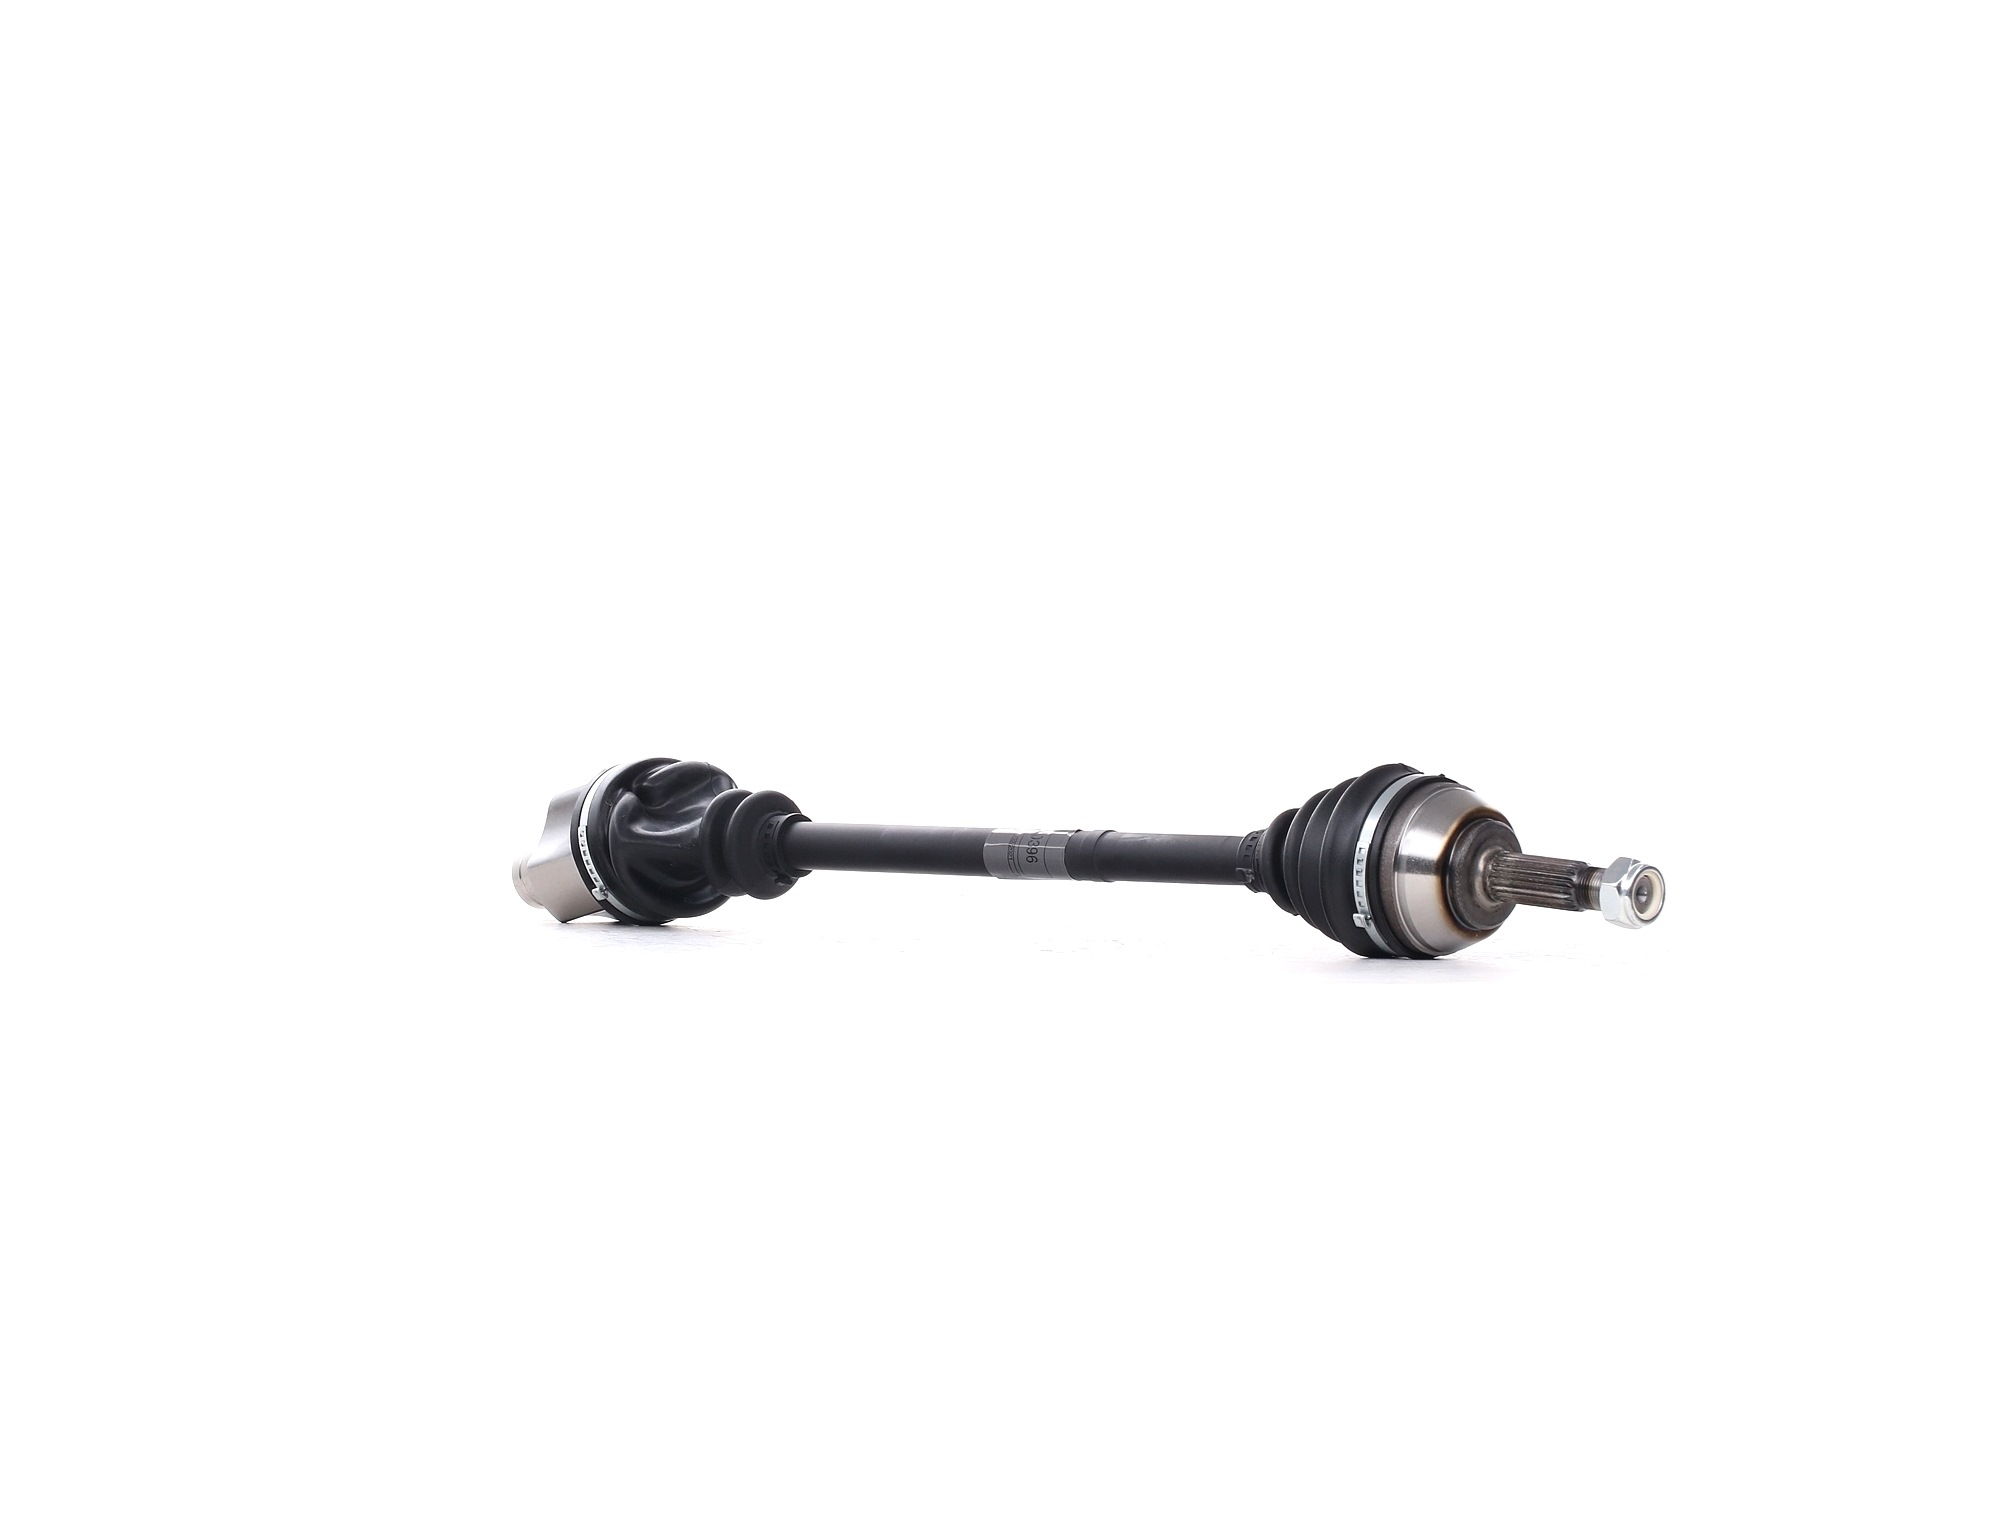 METELLI Drive axle shaft rear and front Renault Kangoo kc01 new 17-0396